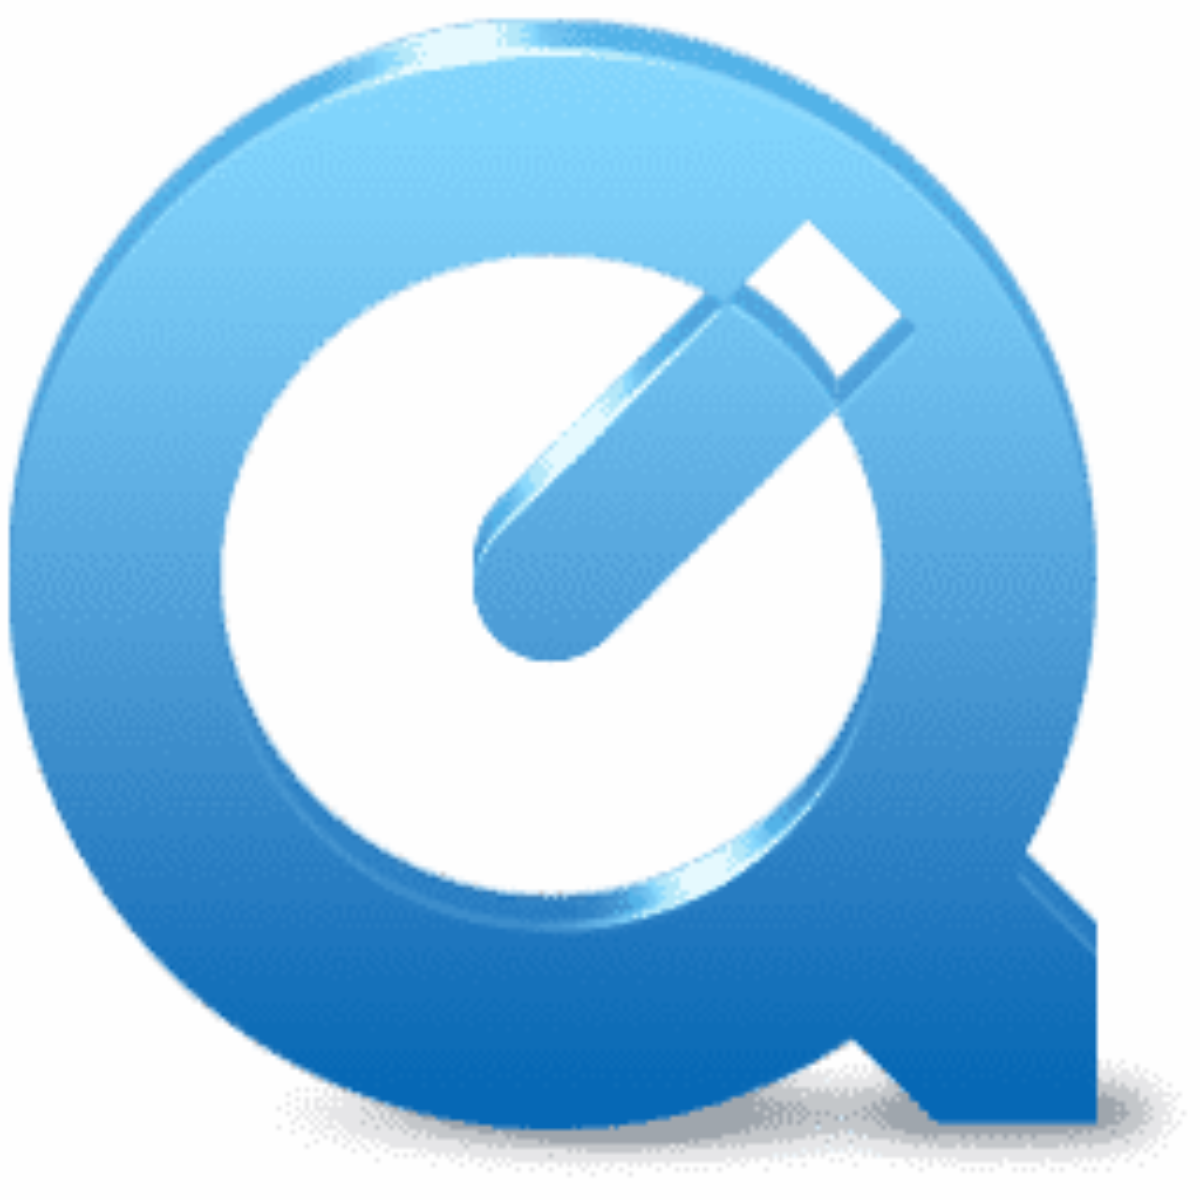 how can i download quicktime player 7 pro for mac